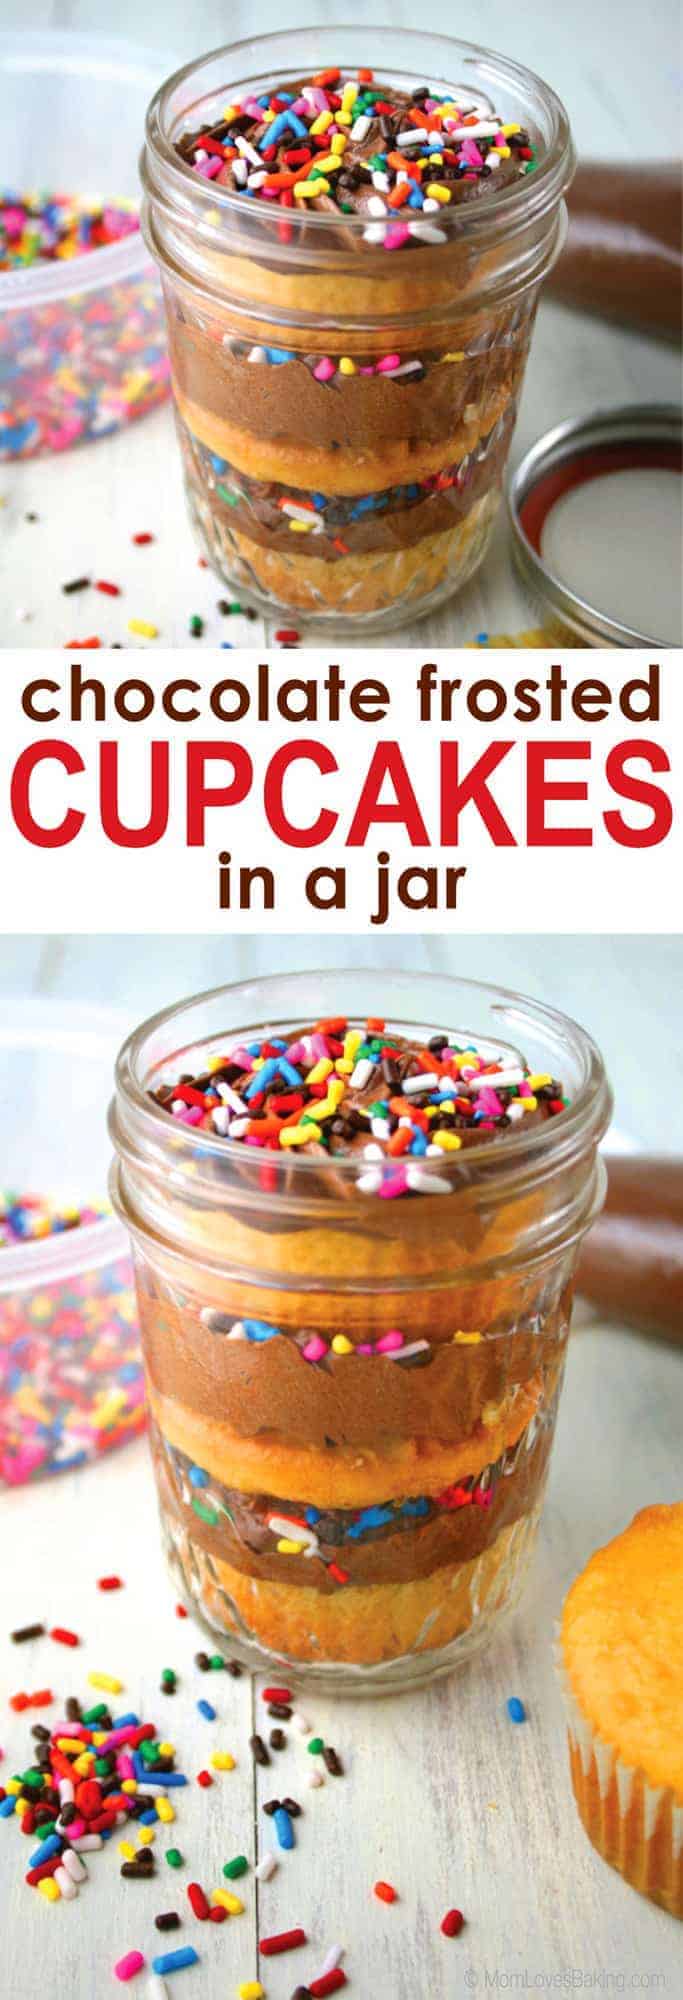 Chocolate Frosted Cupcakes in a Jar